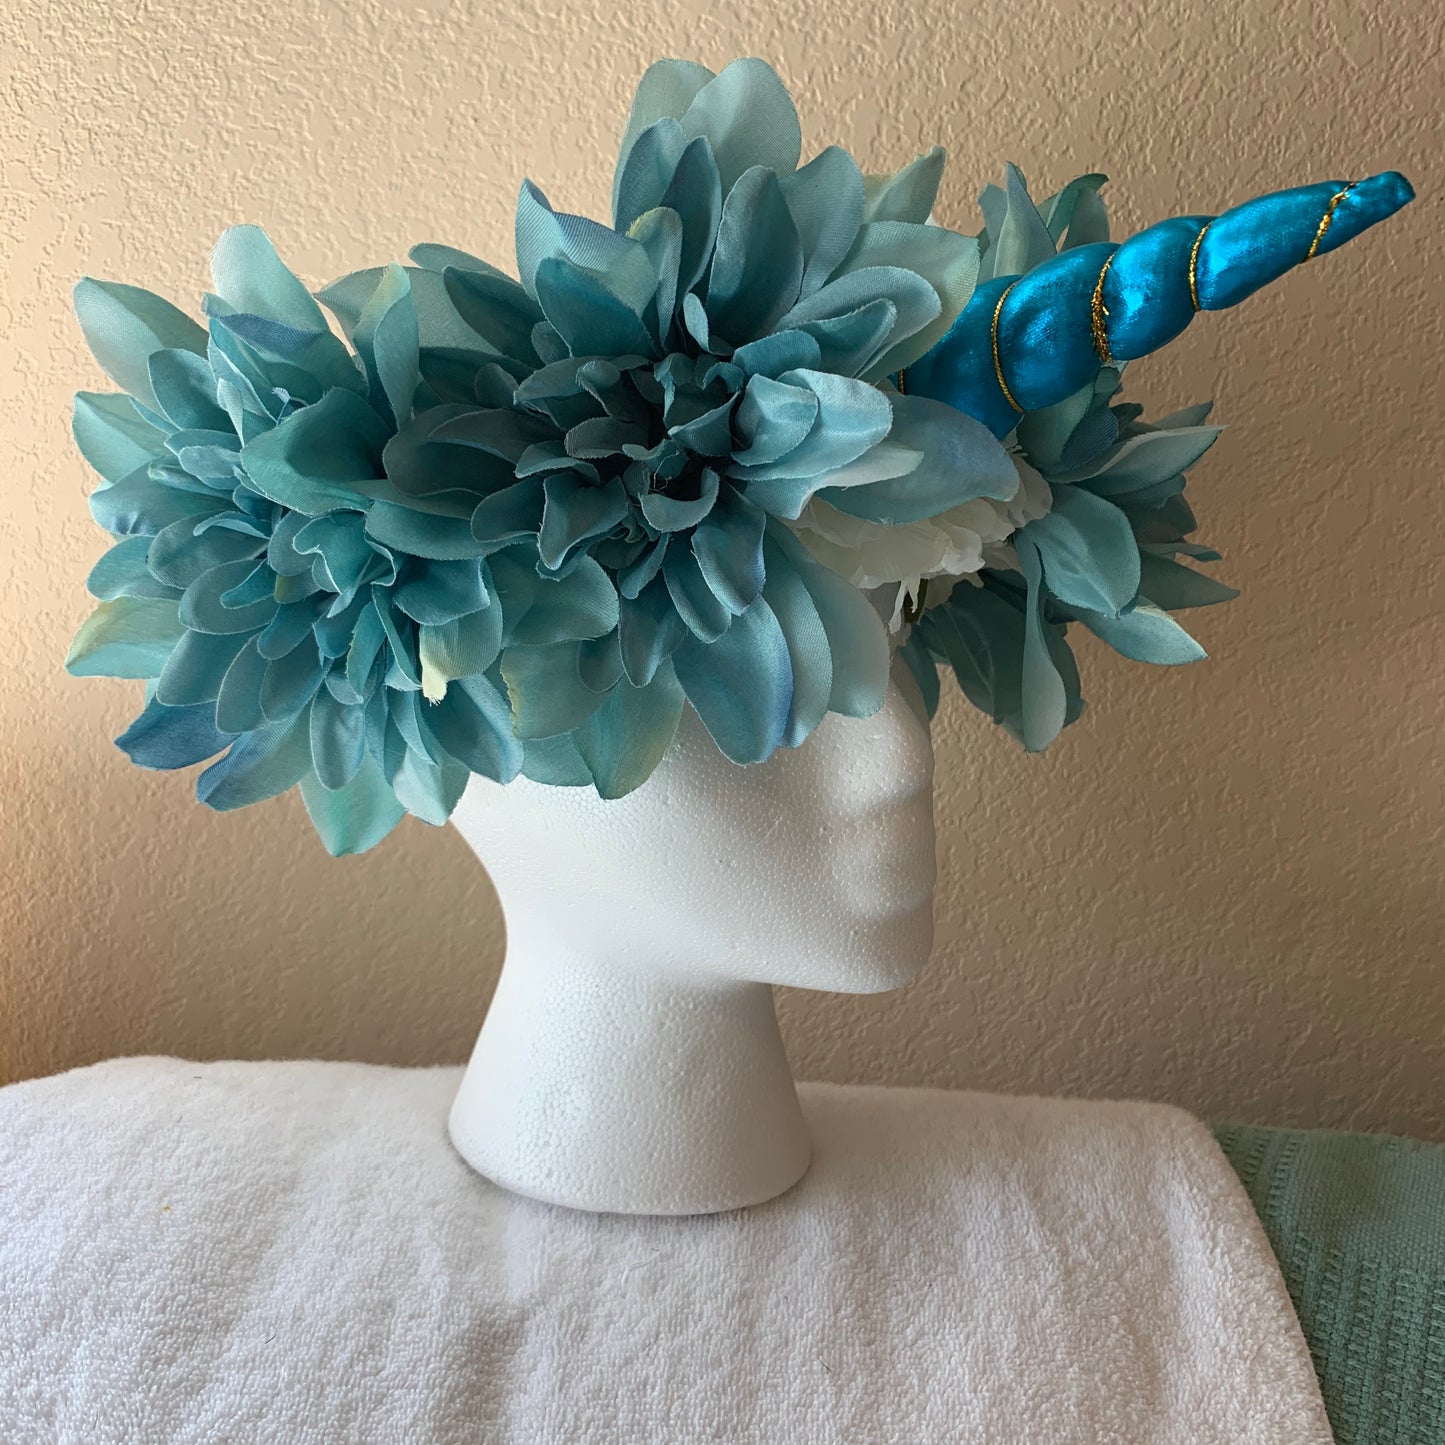 Large Wreath - Teal and White Unicorn